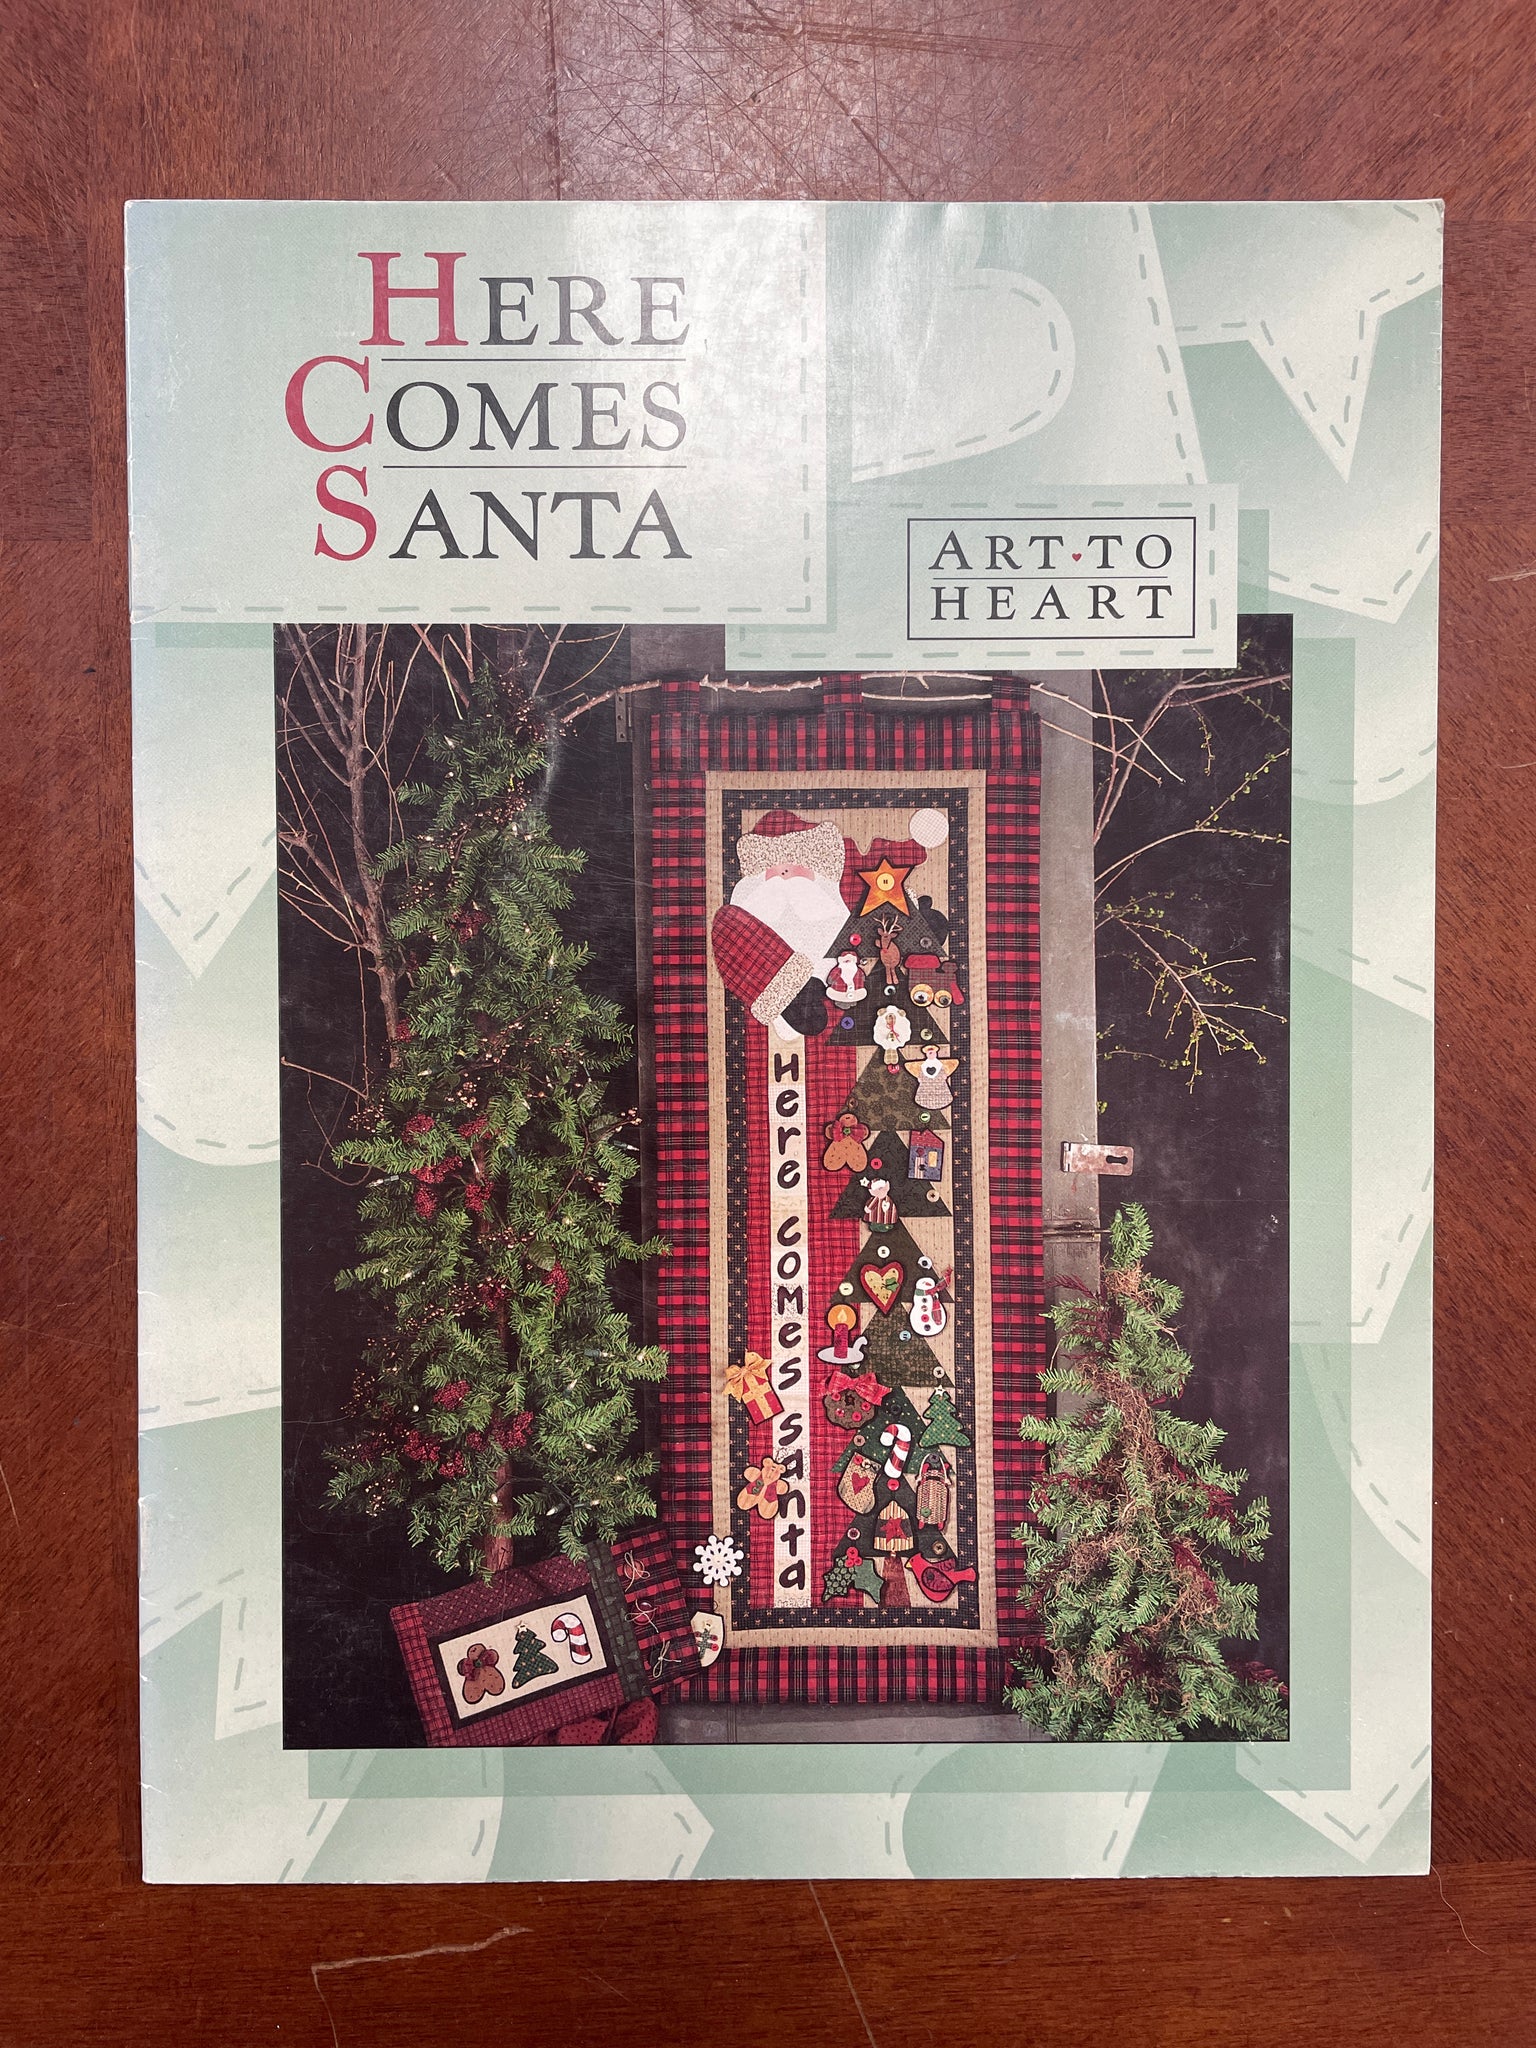 1997 Quilted Appliqué Pattern Book - "Here Comes Santa"